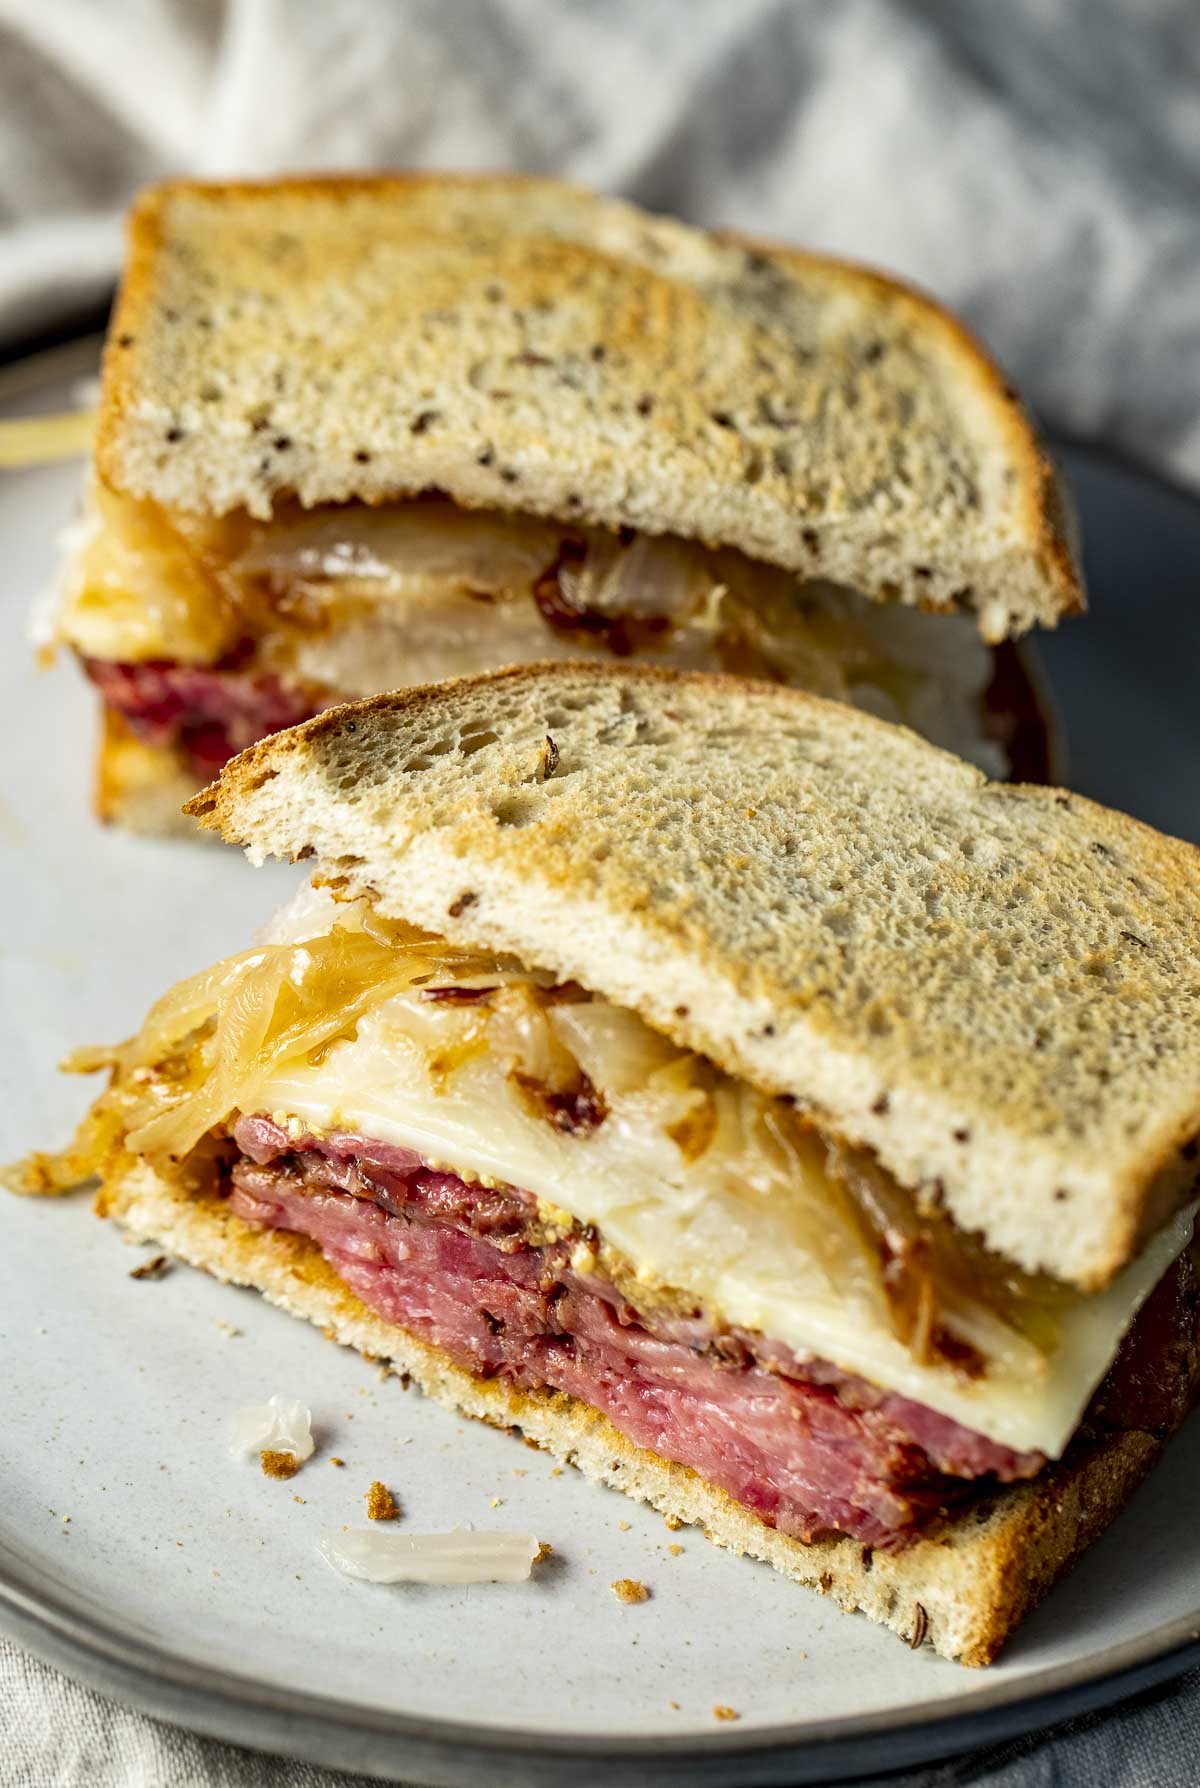 Pastrami sandwich cut in half and arranged on a plate.